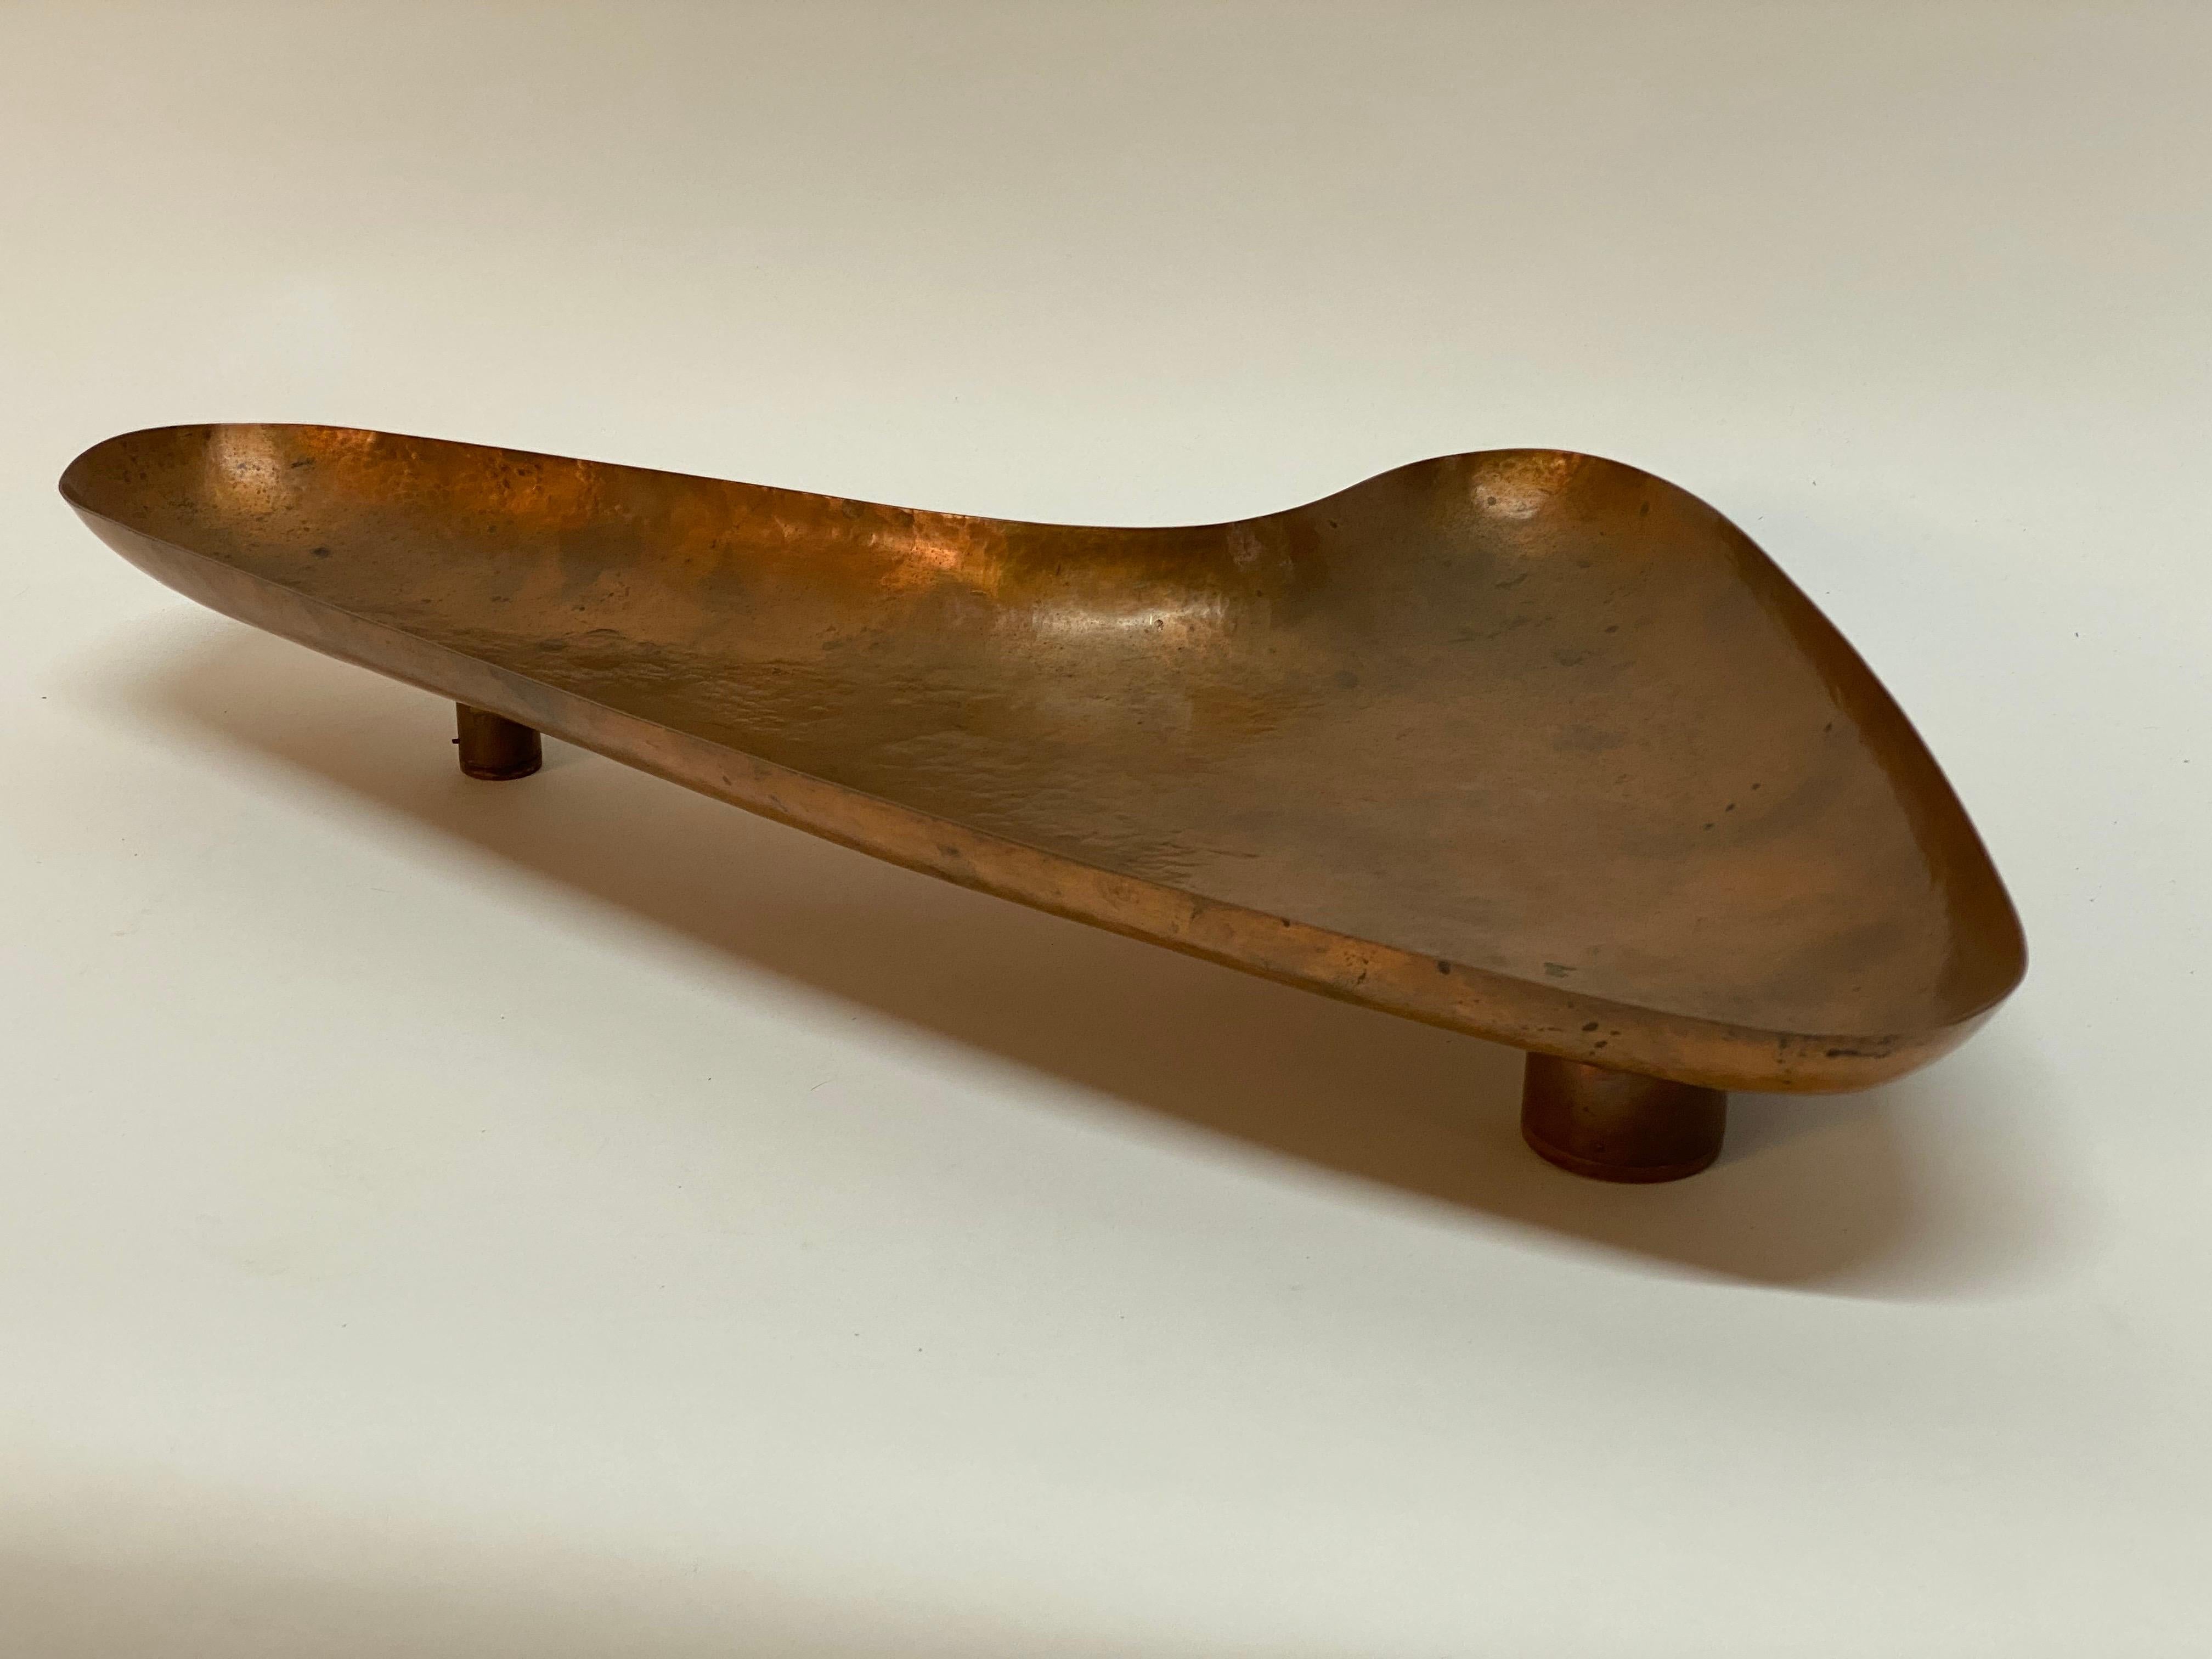 Beautiful hand hammered copper boomerang shaped catchall. Die stamped monogram on the underside, MM, Handwrought. Standing on three wood capped feet. Purchased from a beautiful waterfront home in Greenwich, CT. Circa 1960-70.

Good overall condition